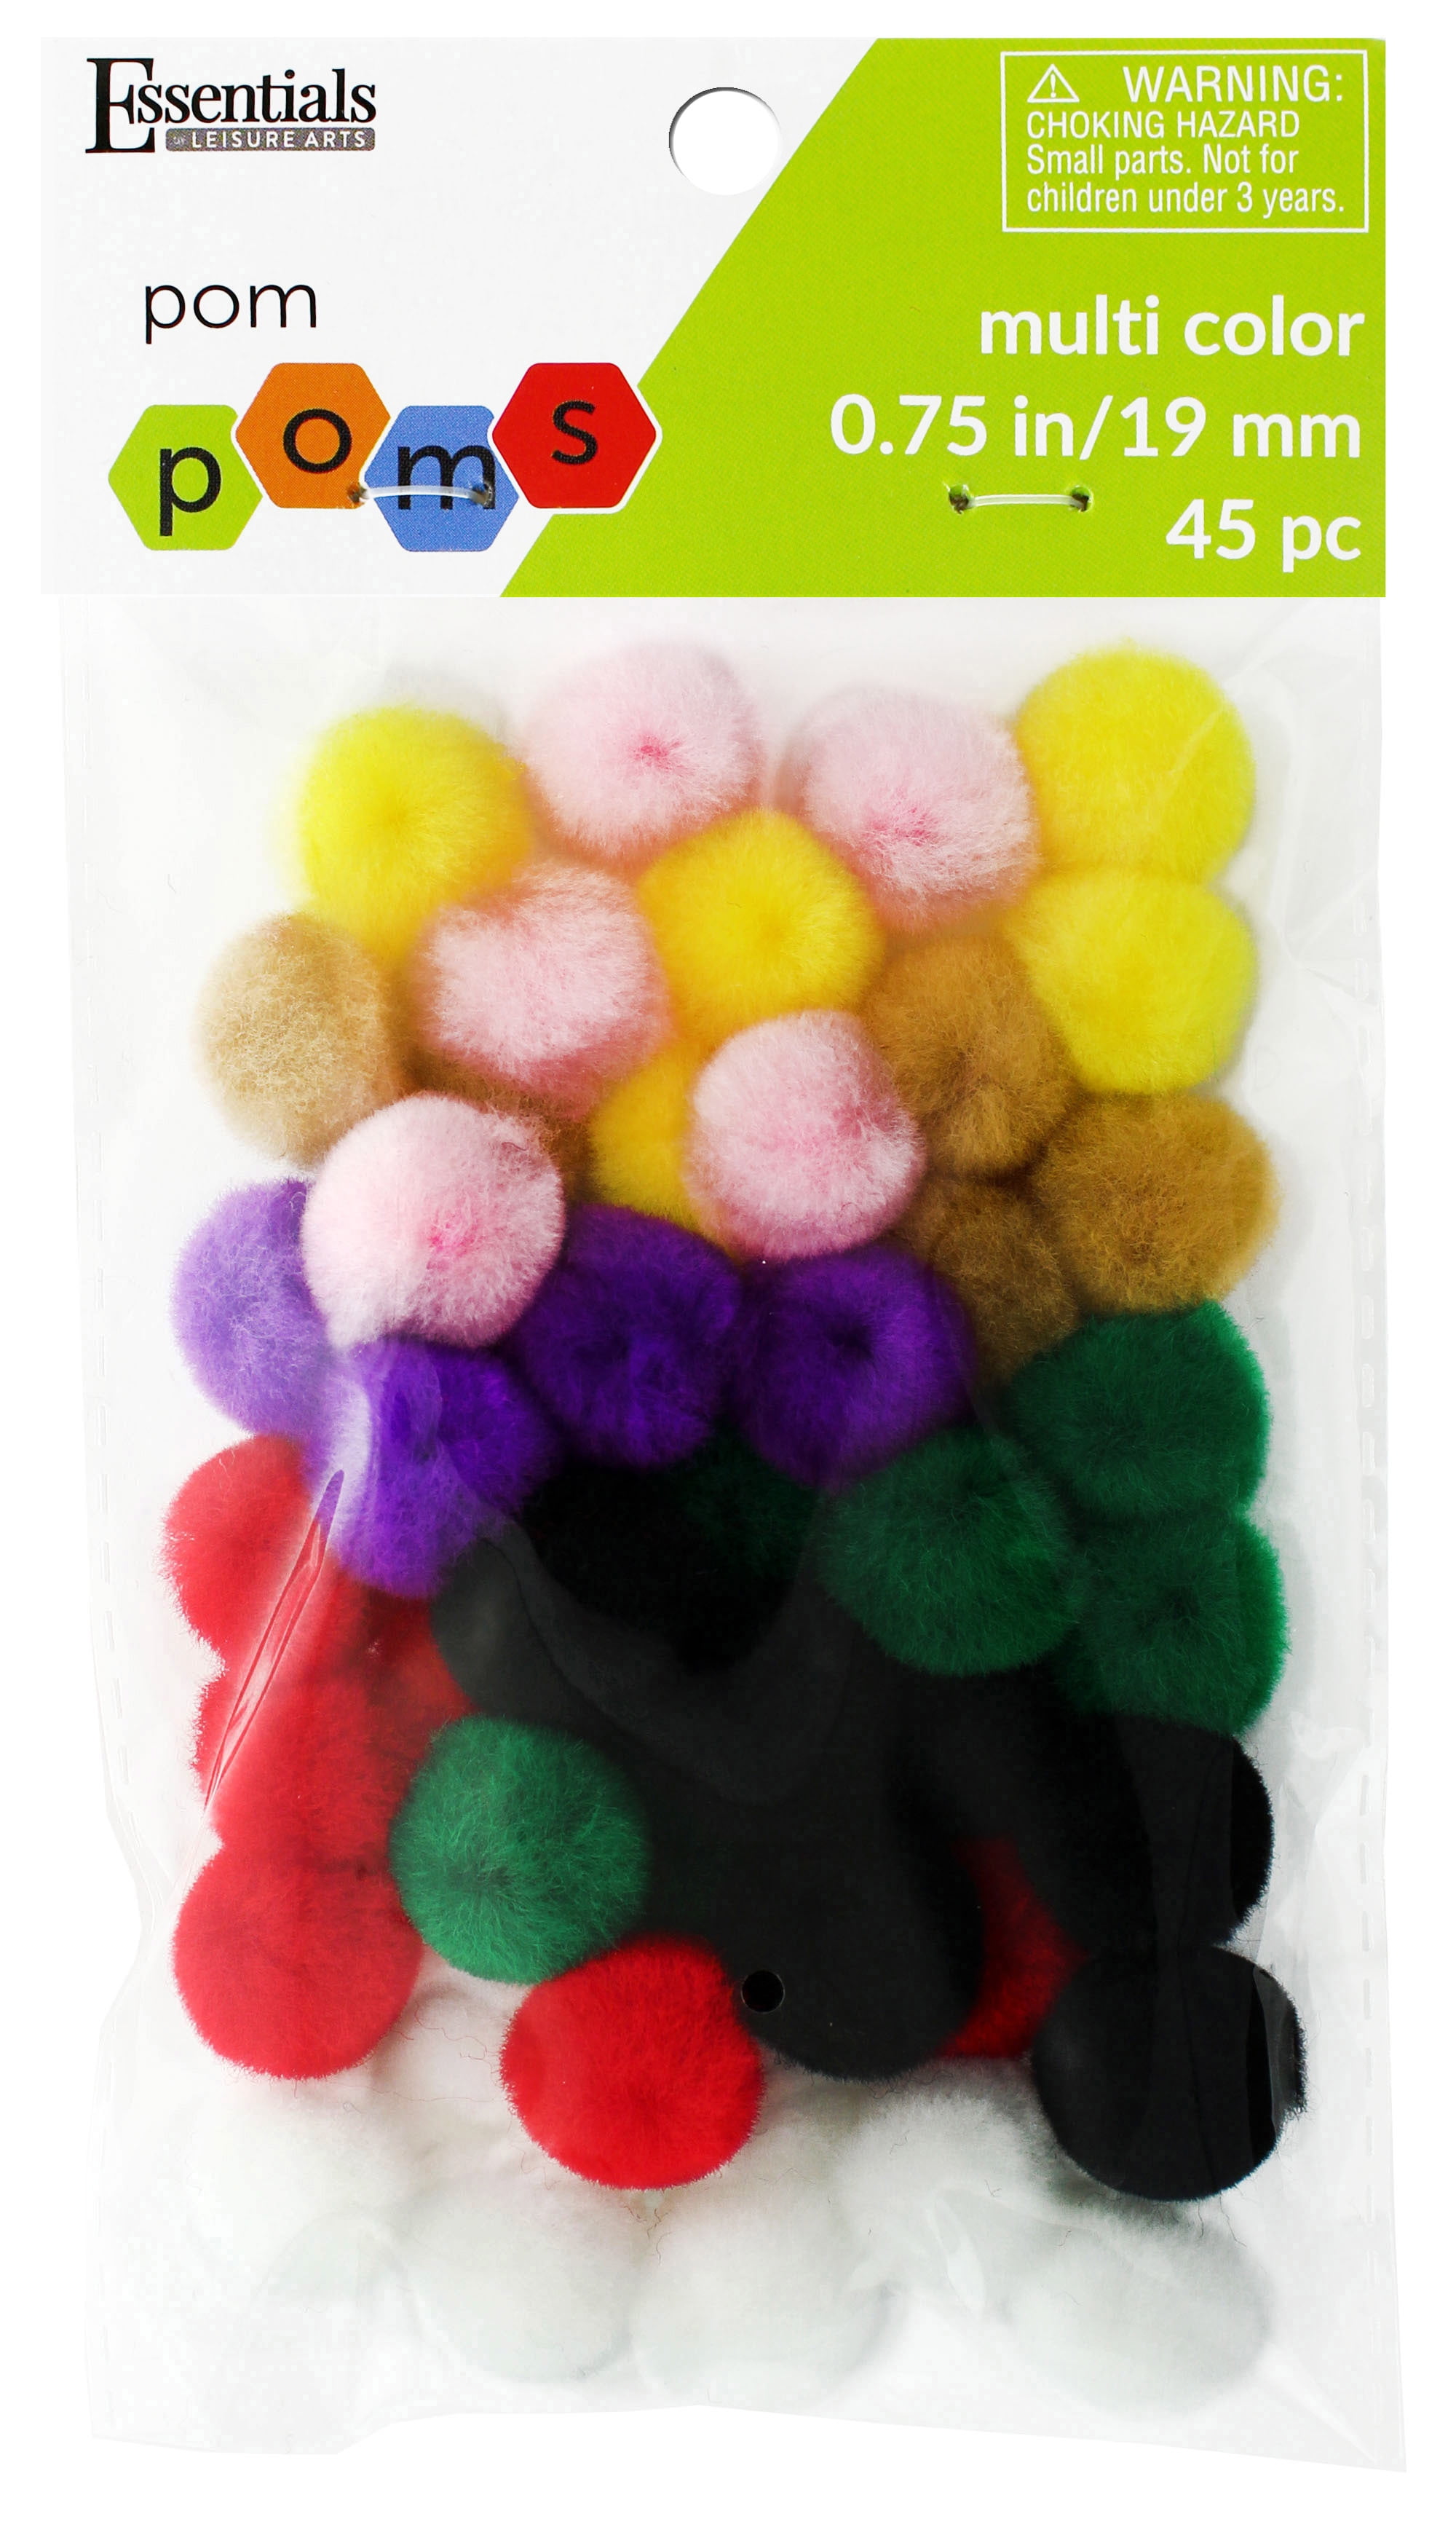 Winter Self-Adhesive Glitter Pom Poms (Pack of 150) Christmas Craft Supplies